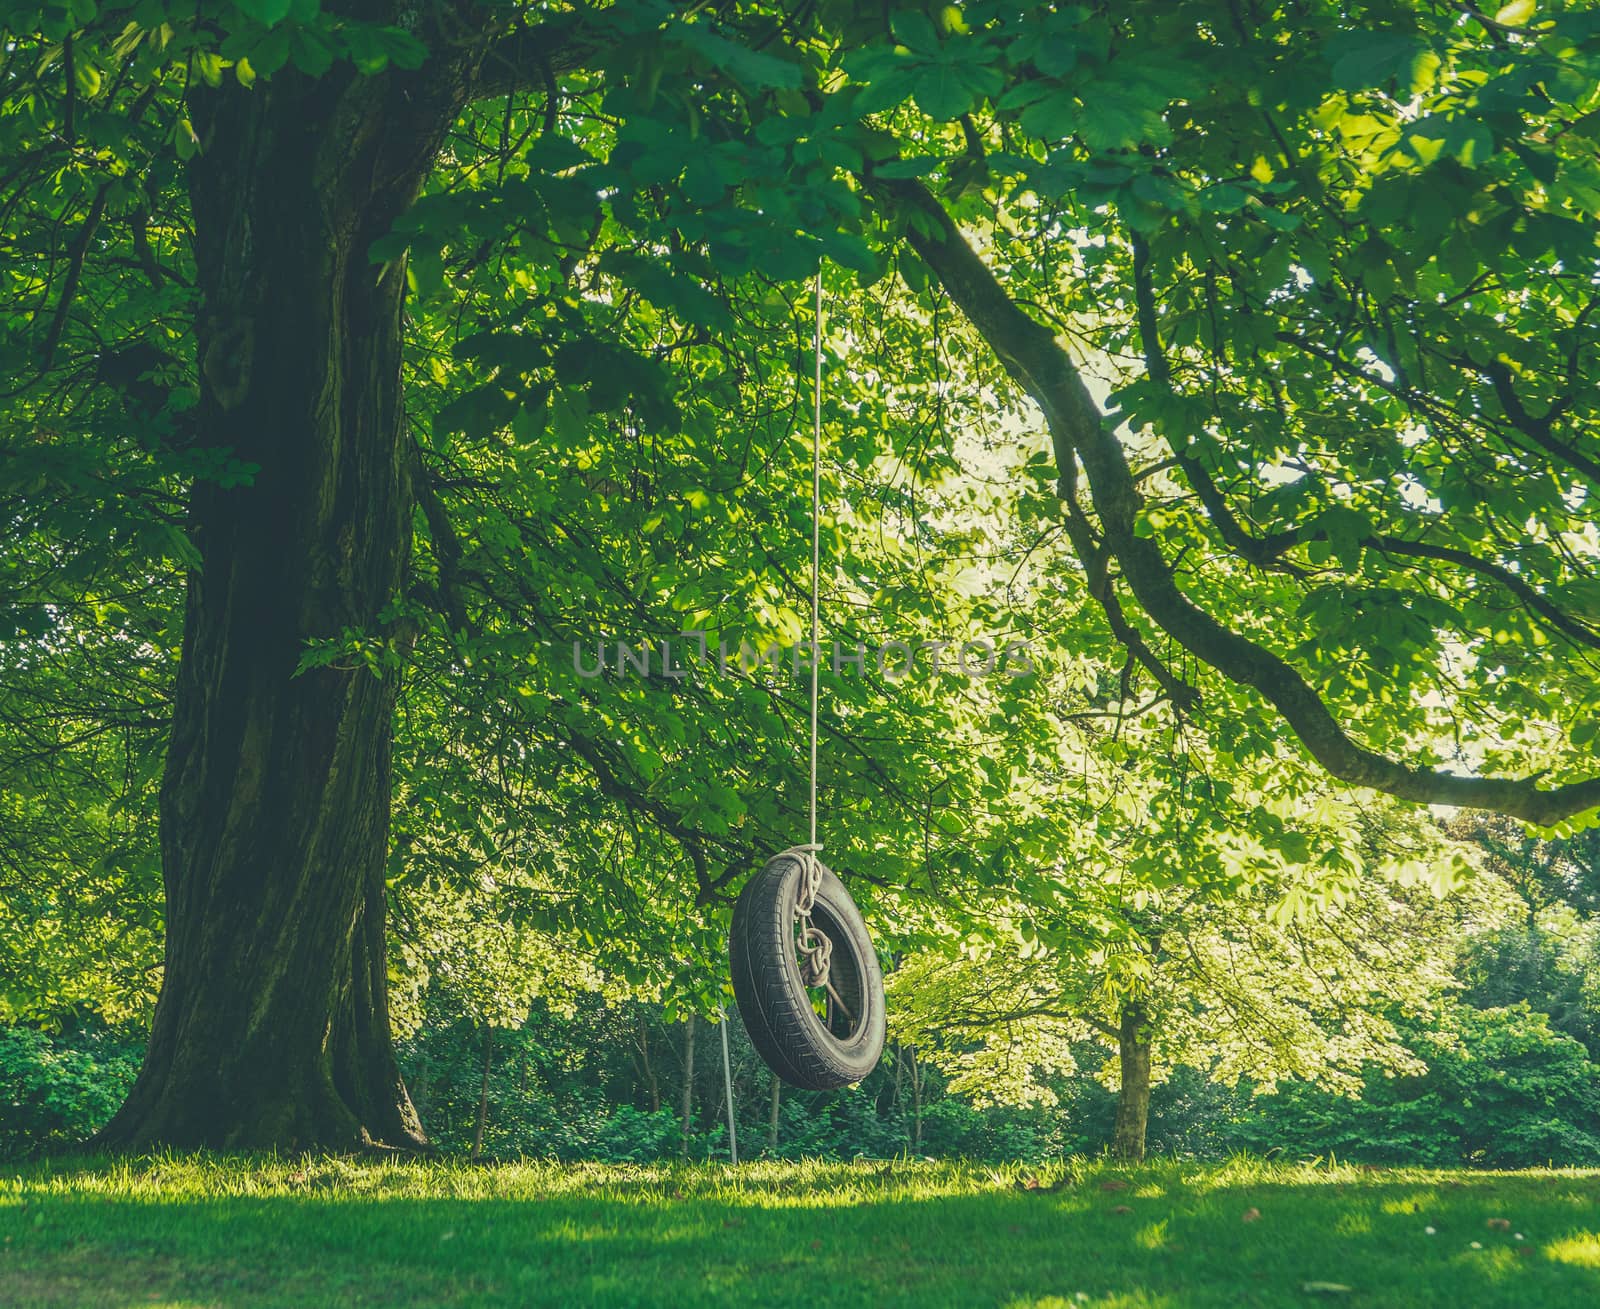 Childhood Nostalgia Image Of a Tire Swing Hanging From A Tree On A Summer's Afternoon